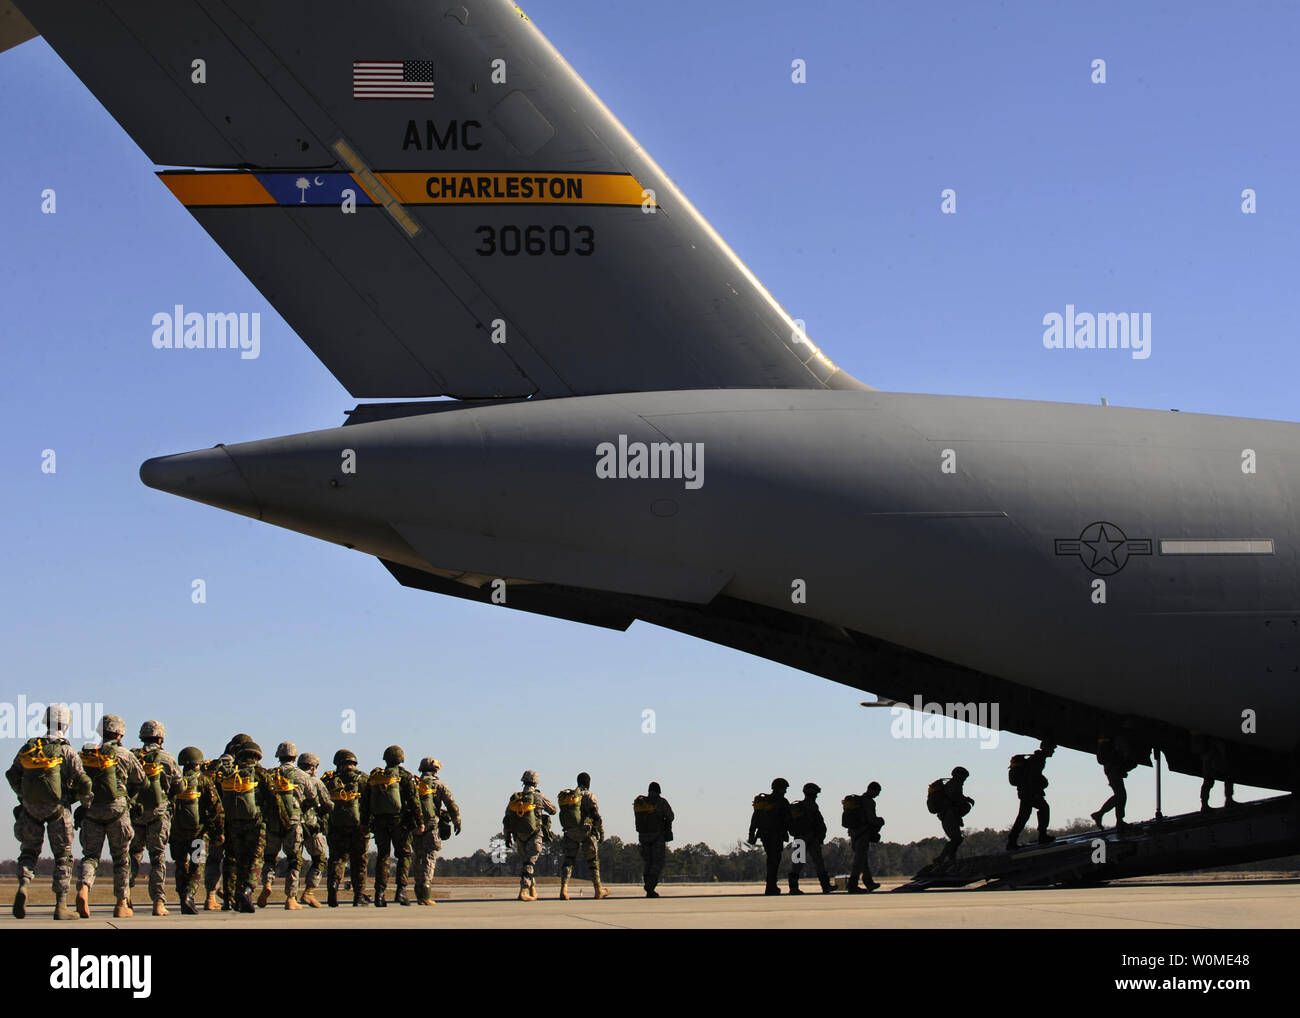 U.S. Airmen of the 820th Security Forces Group and British airmen from the No. 2 Squadron, Royal Air Force Regiment board a C-17 Globemaster III aircraft prior to performing a static-line parachute jump at Moody Air Force Base in Georgia on February 5, 2009. (UPI Photo/Brittany Barker/U.S. Air Force) Stock Photo